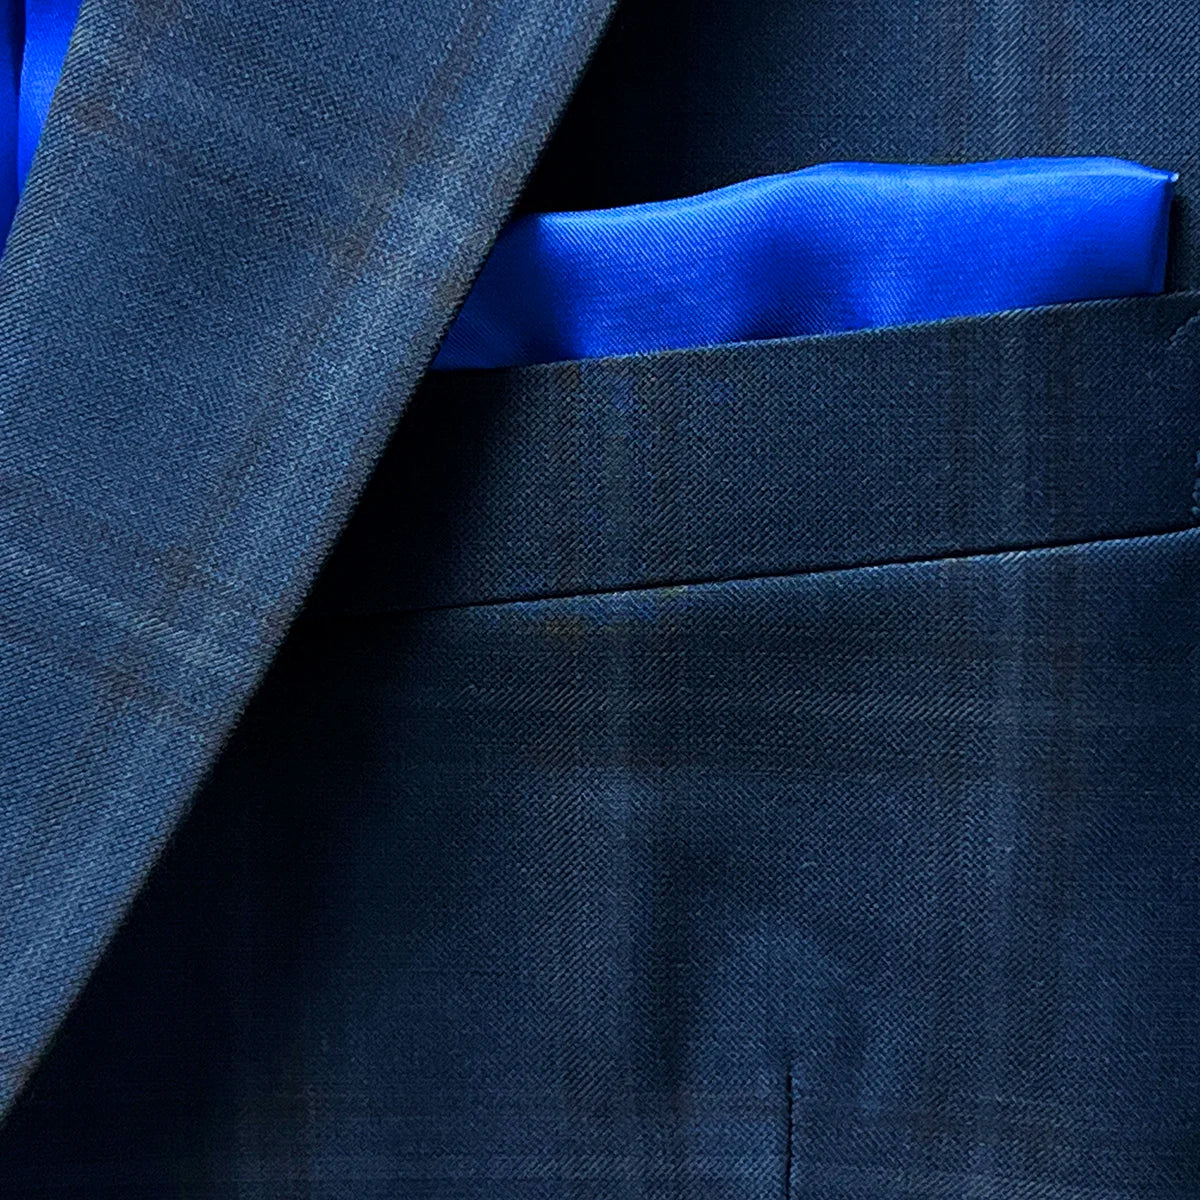 Close-up of the built-in pocket square on the dark midnight blue sportcoat.